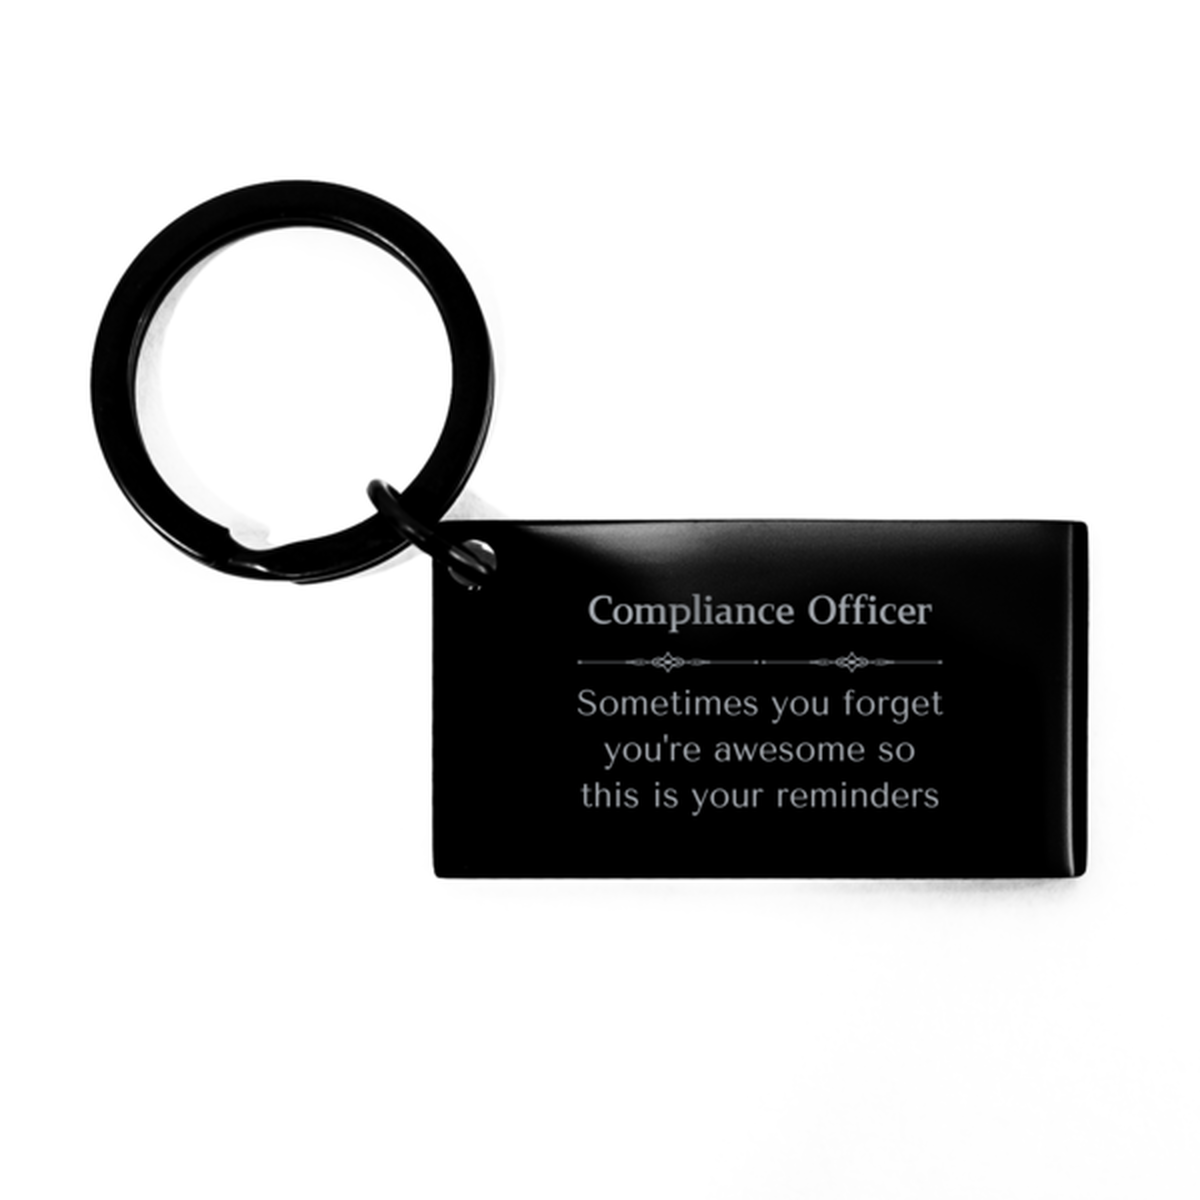 Sentimental Compliance Officer Keychain, Electrician Sometimes you forget you're awesome so this is your reminders, Graduation Christmas Birthday Gifts for Compliance Officer, Men, Women, Coworkers